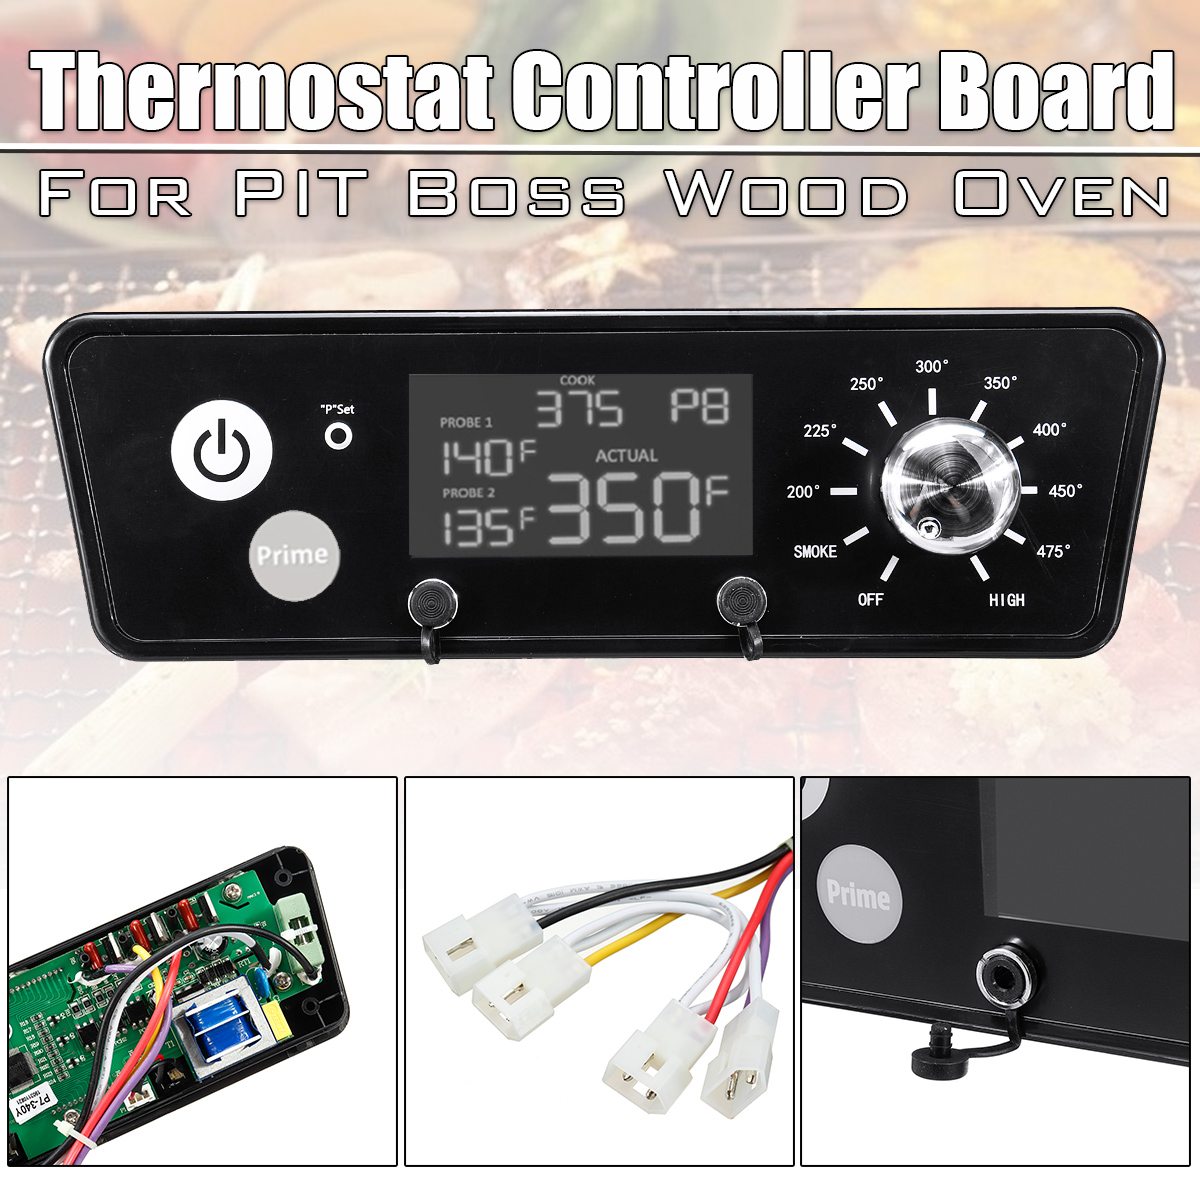 120V P7-340 Digital Thermometer Thermostat Controller Board LCD Display  For PIT Boss Wood Oven